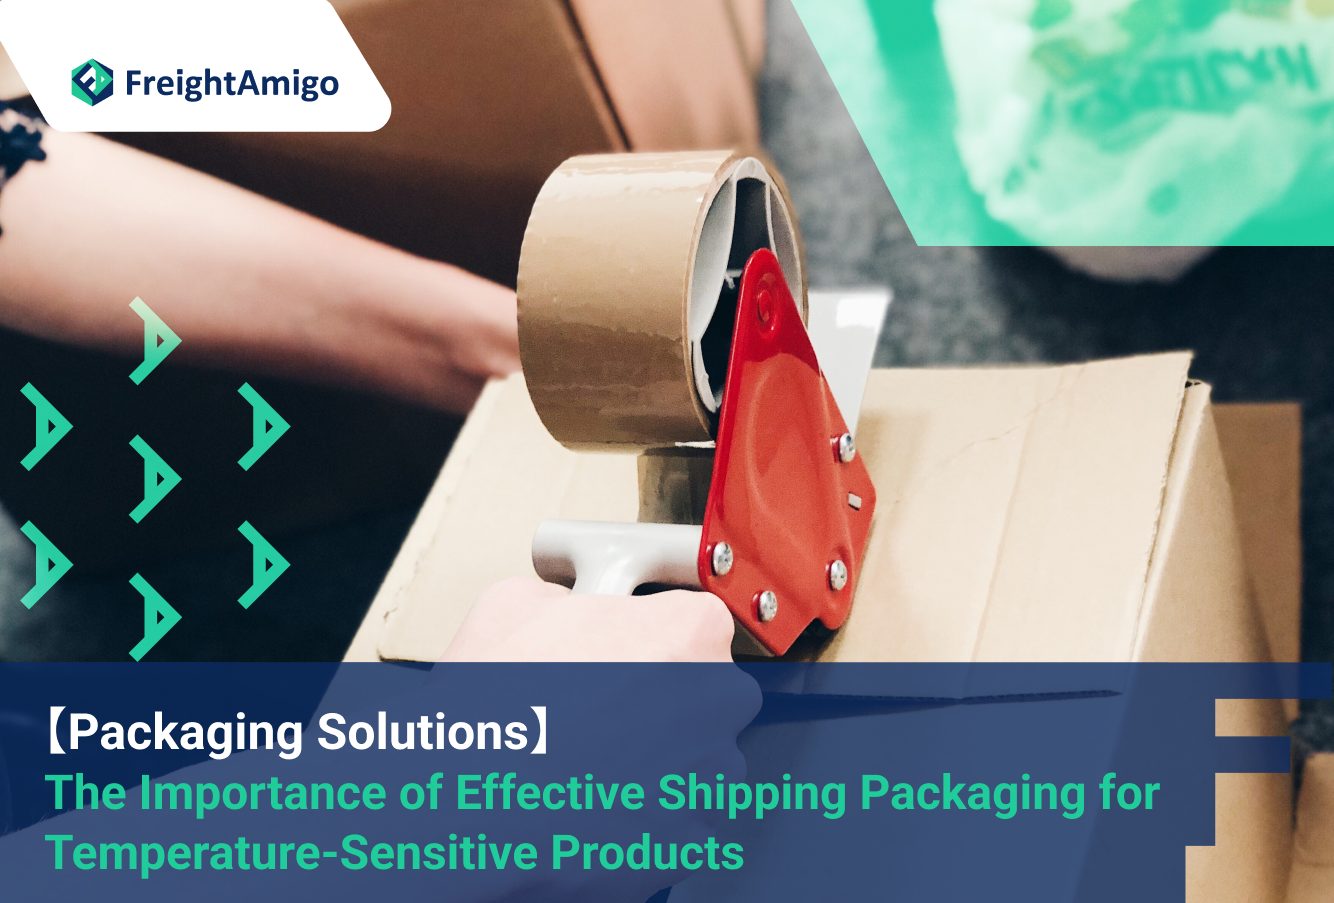 【Packaging Solutions】 The Importance of Effective Shipping Packaging for Temperature-Sensitive Products